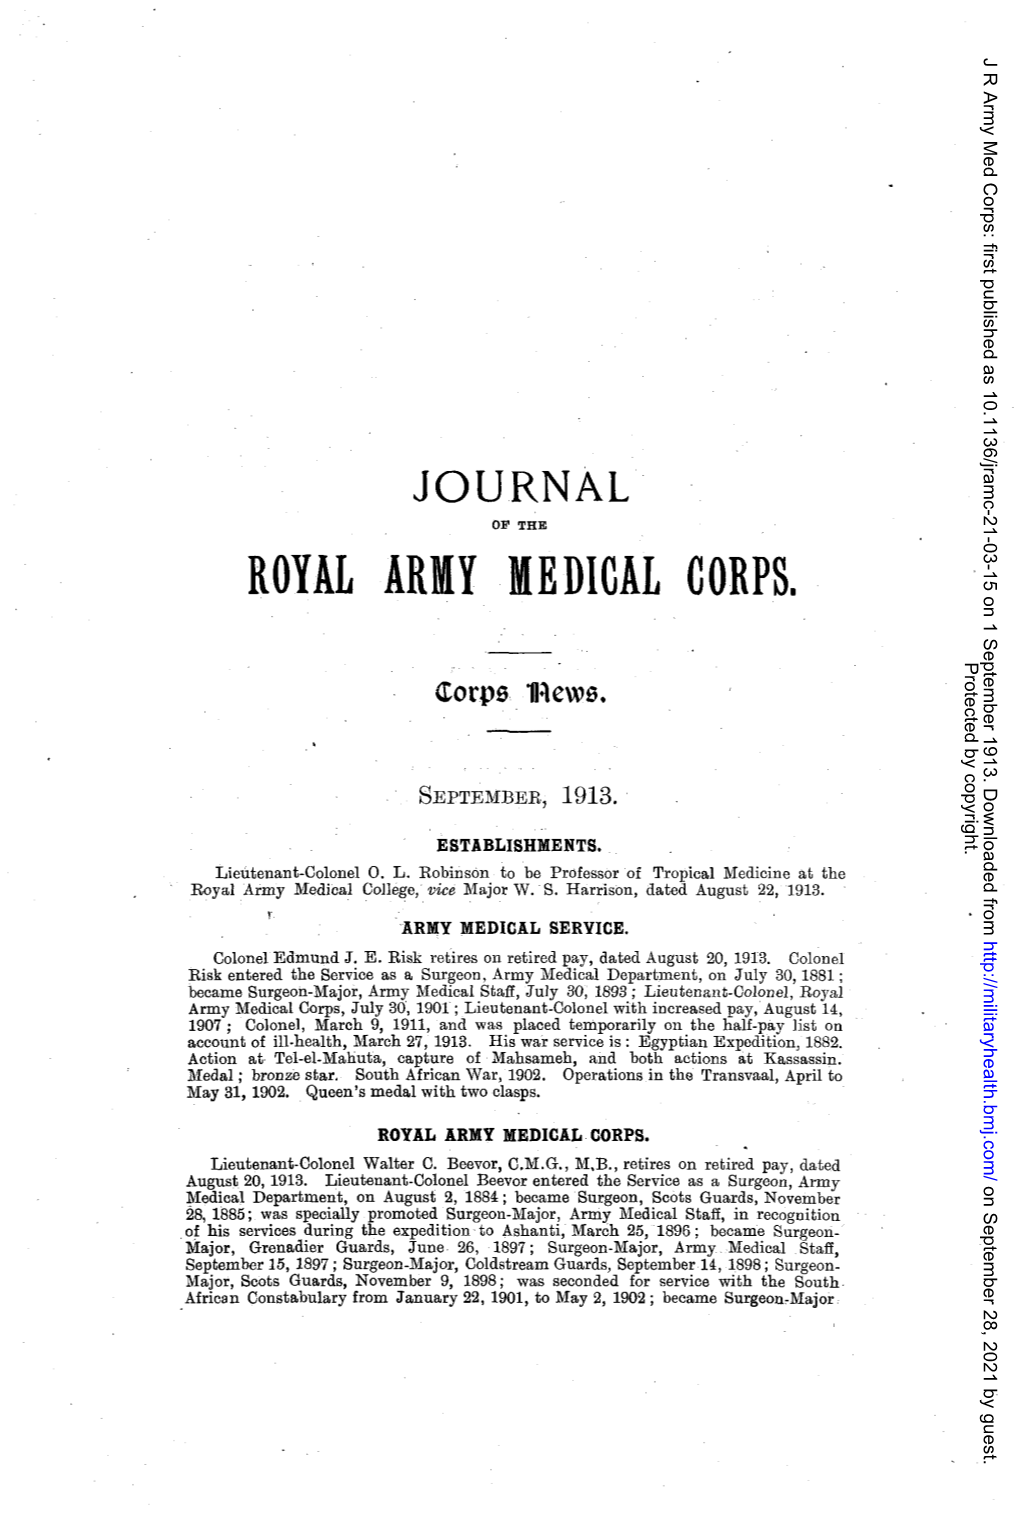 ROYAL ARMY MEDICAL CORPS. Protected by Copyright